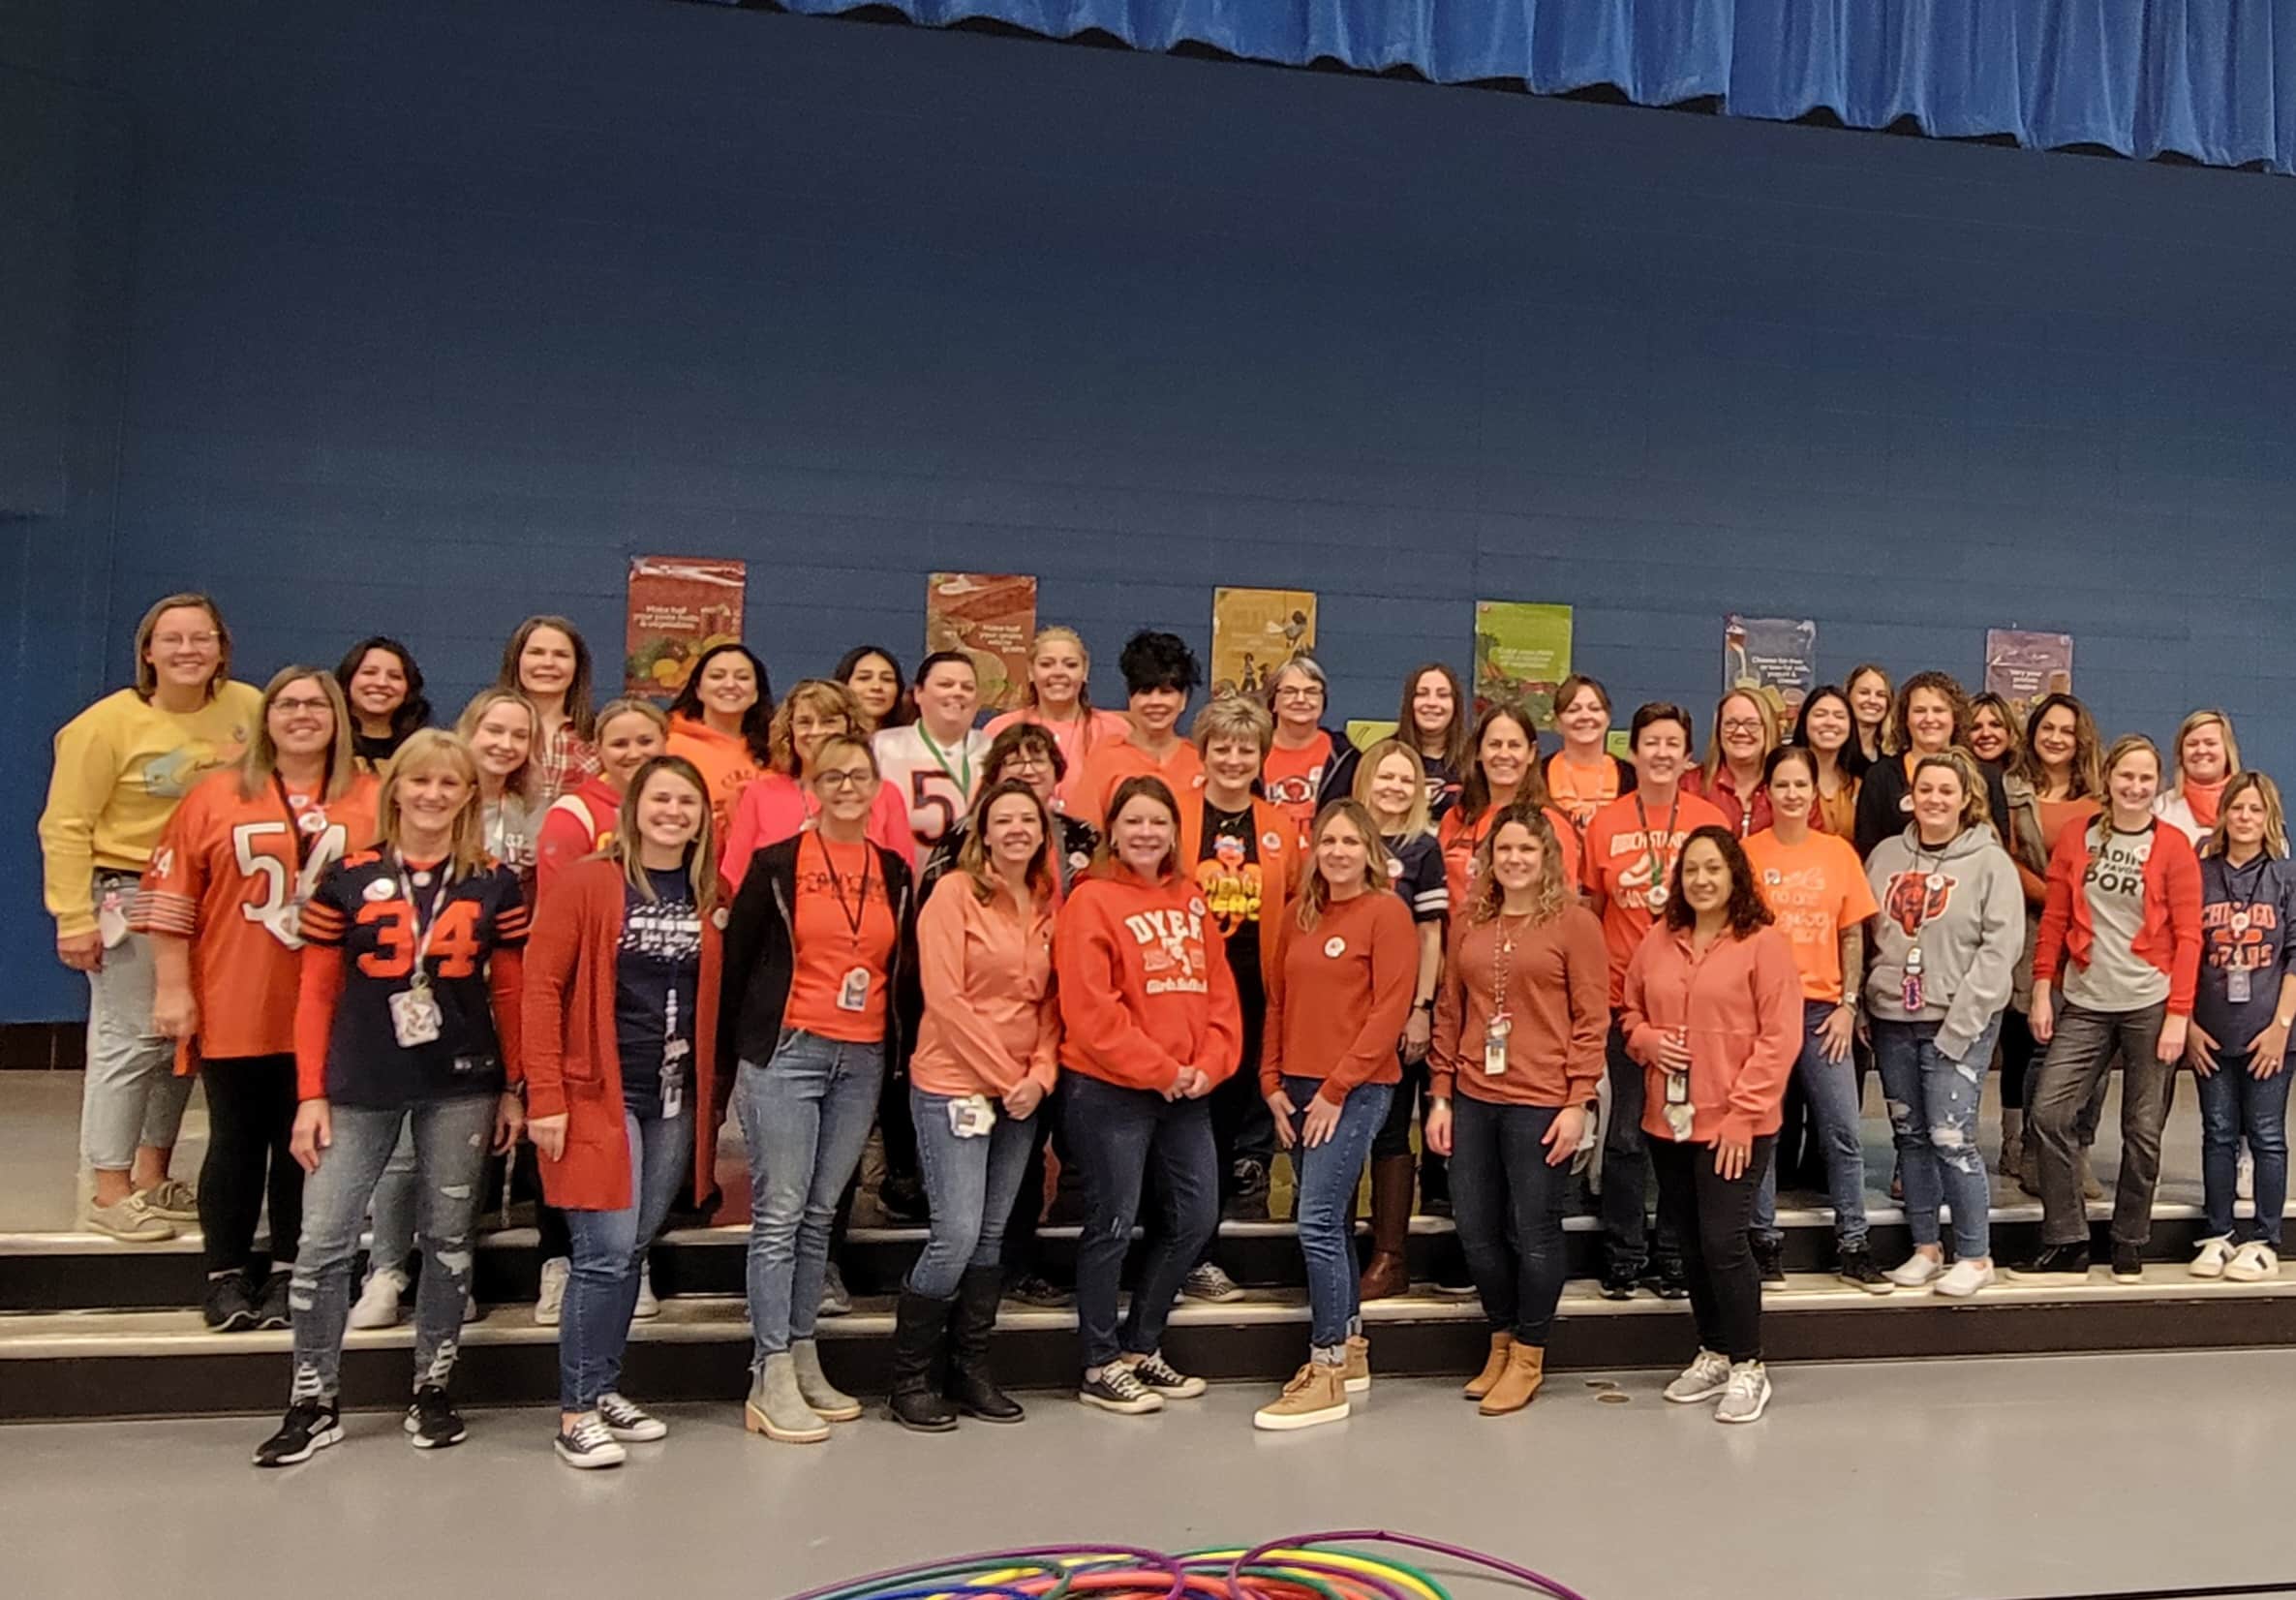 Bibich staff wore orange in support of a fellow staff member who is beginning treatment for a serious health issue.